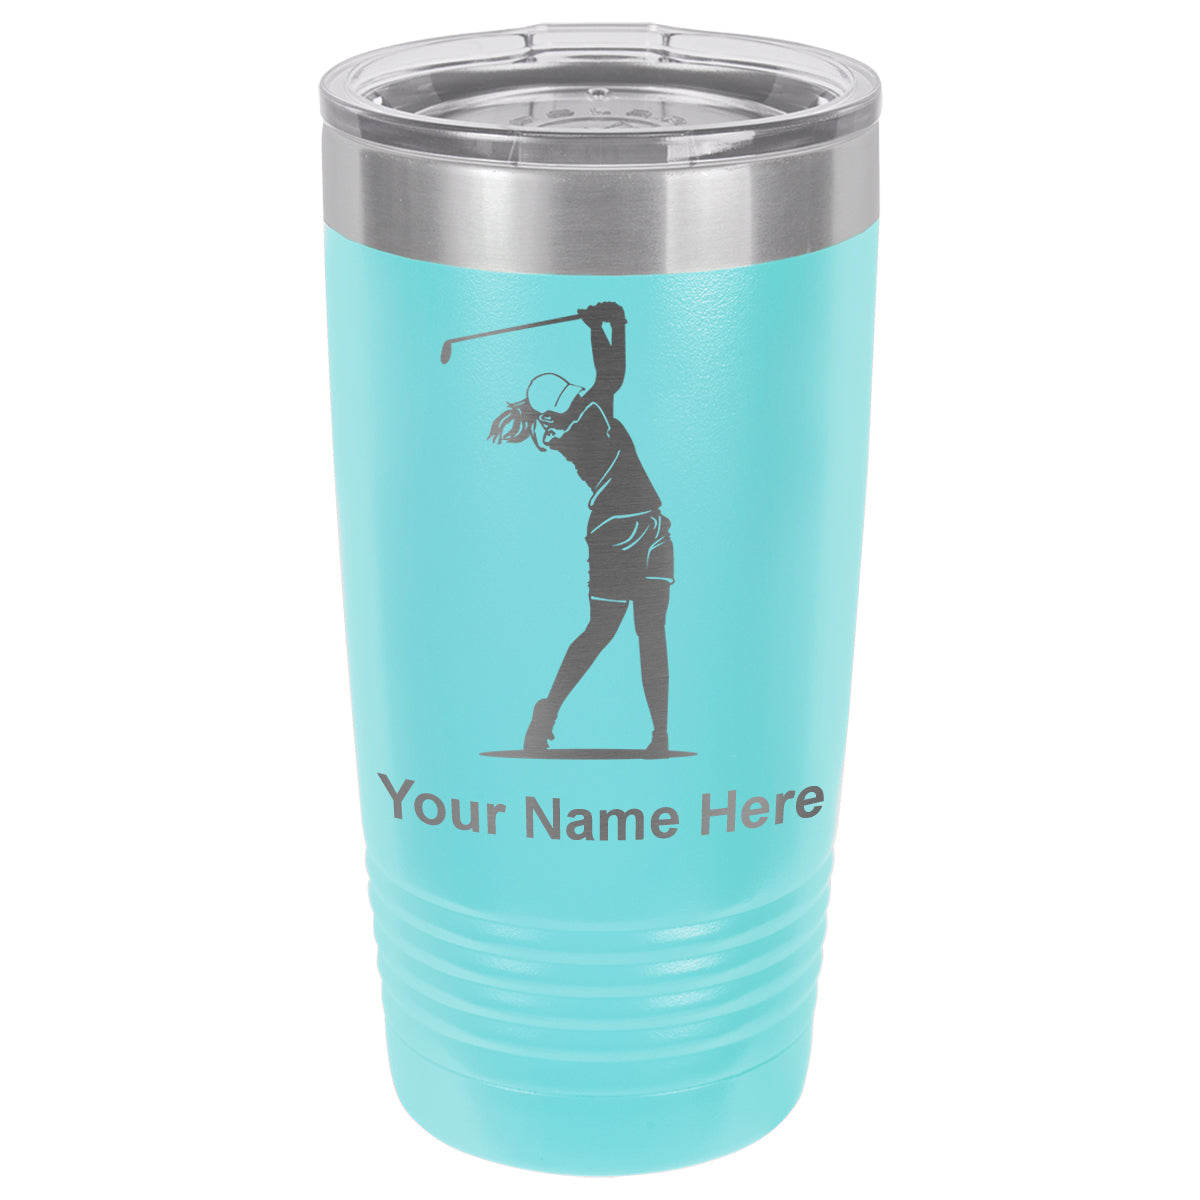 20oz Vacuum Insulated Tumbler Mug, Golfer Woman, Personalized Engraving Included